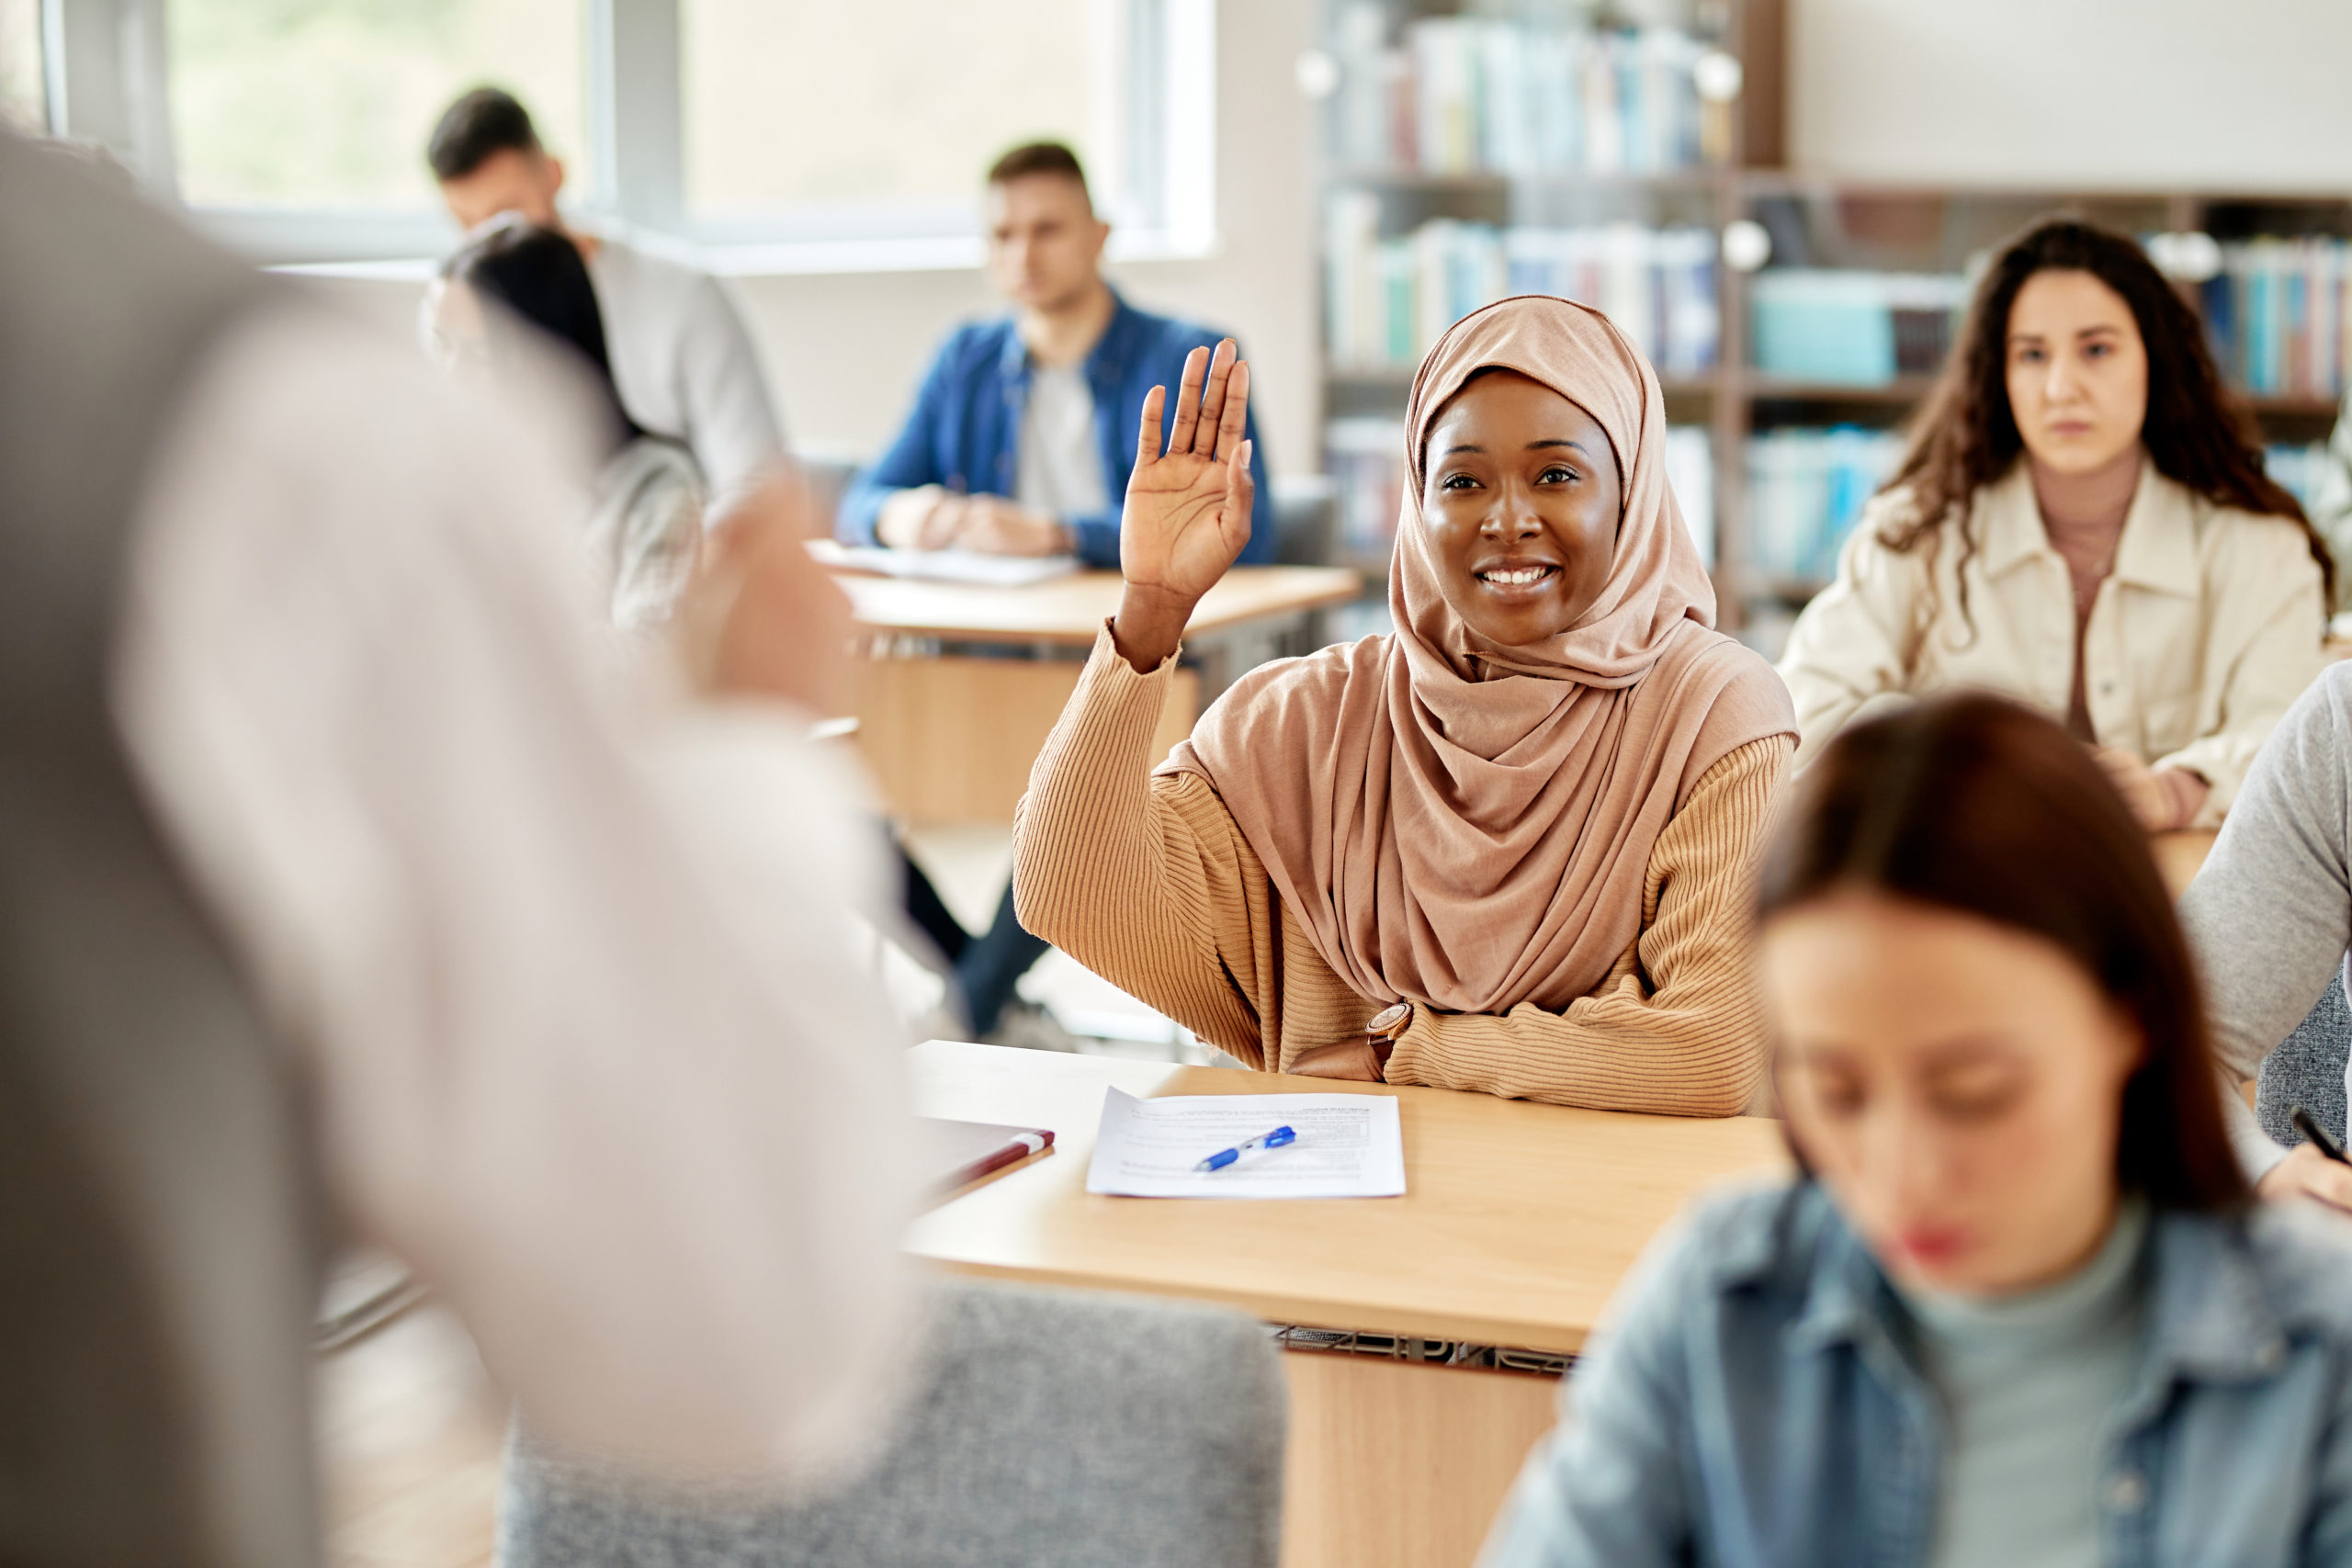 Happy African American student in hijab raising her had to ask a question during lecture at the university.